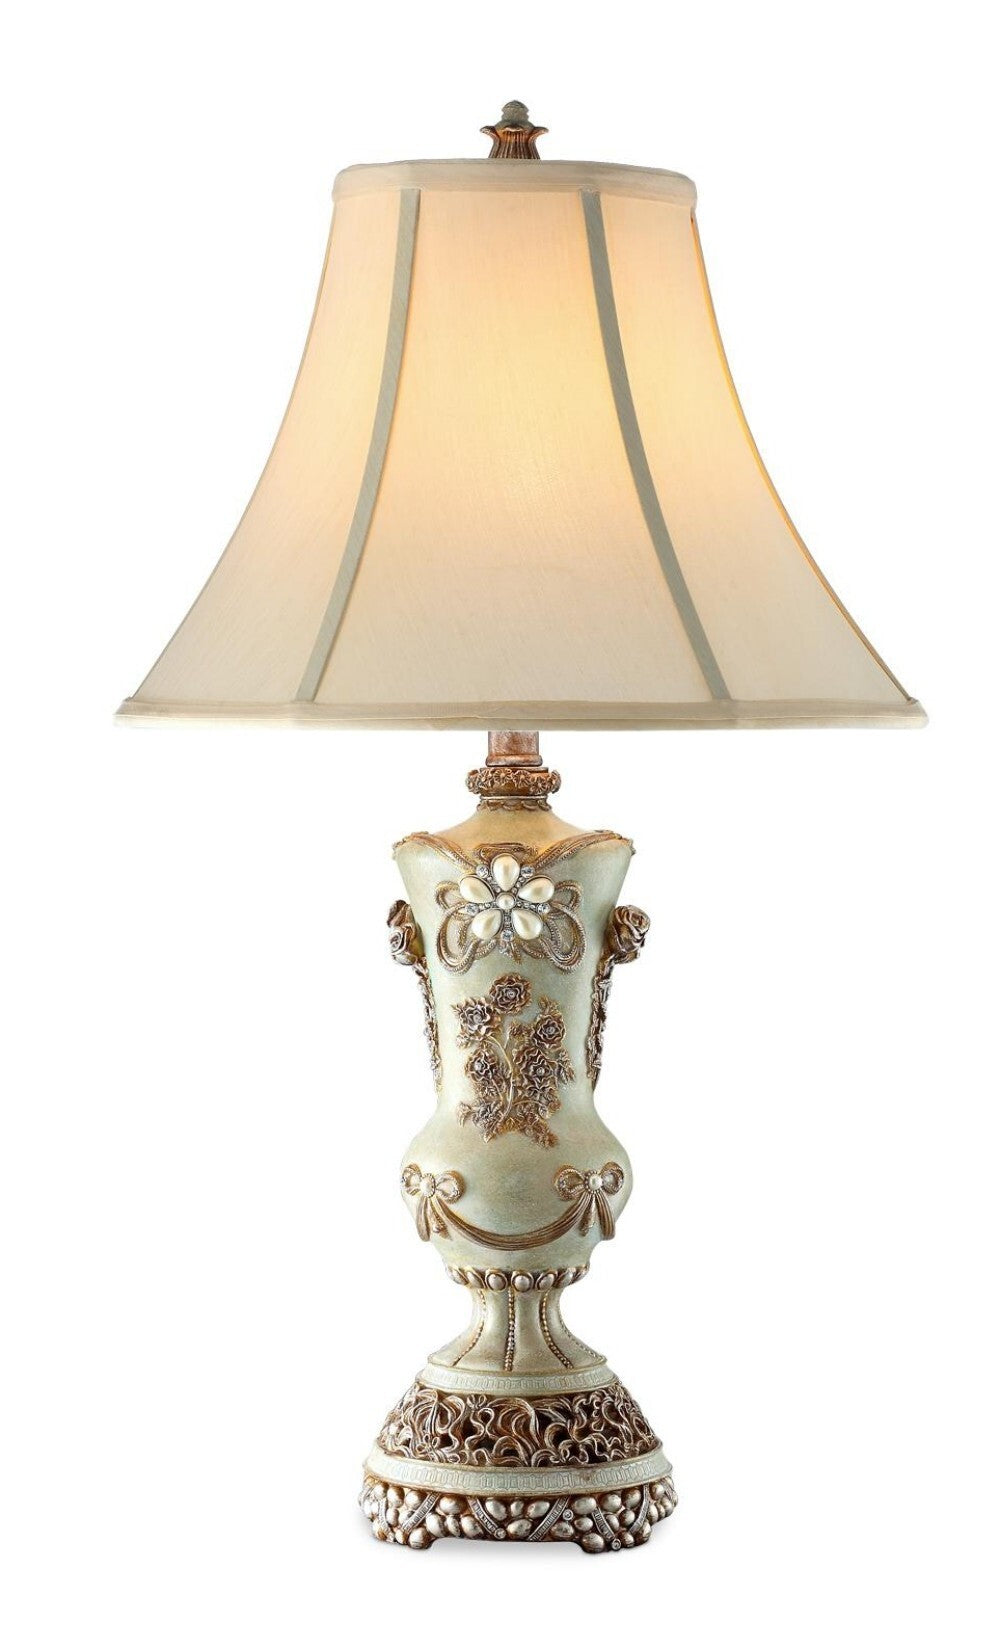 Vintage Silver Table Lamp with Rose Accents